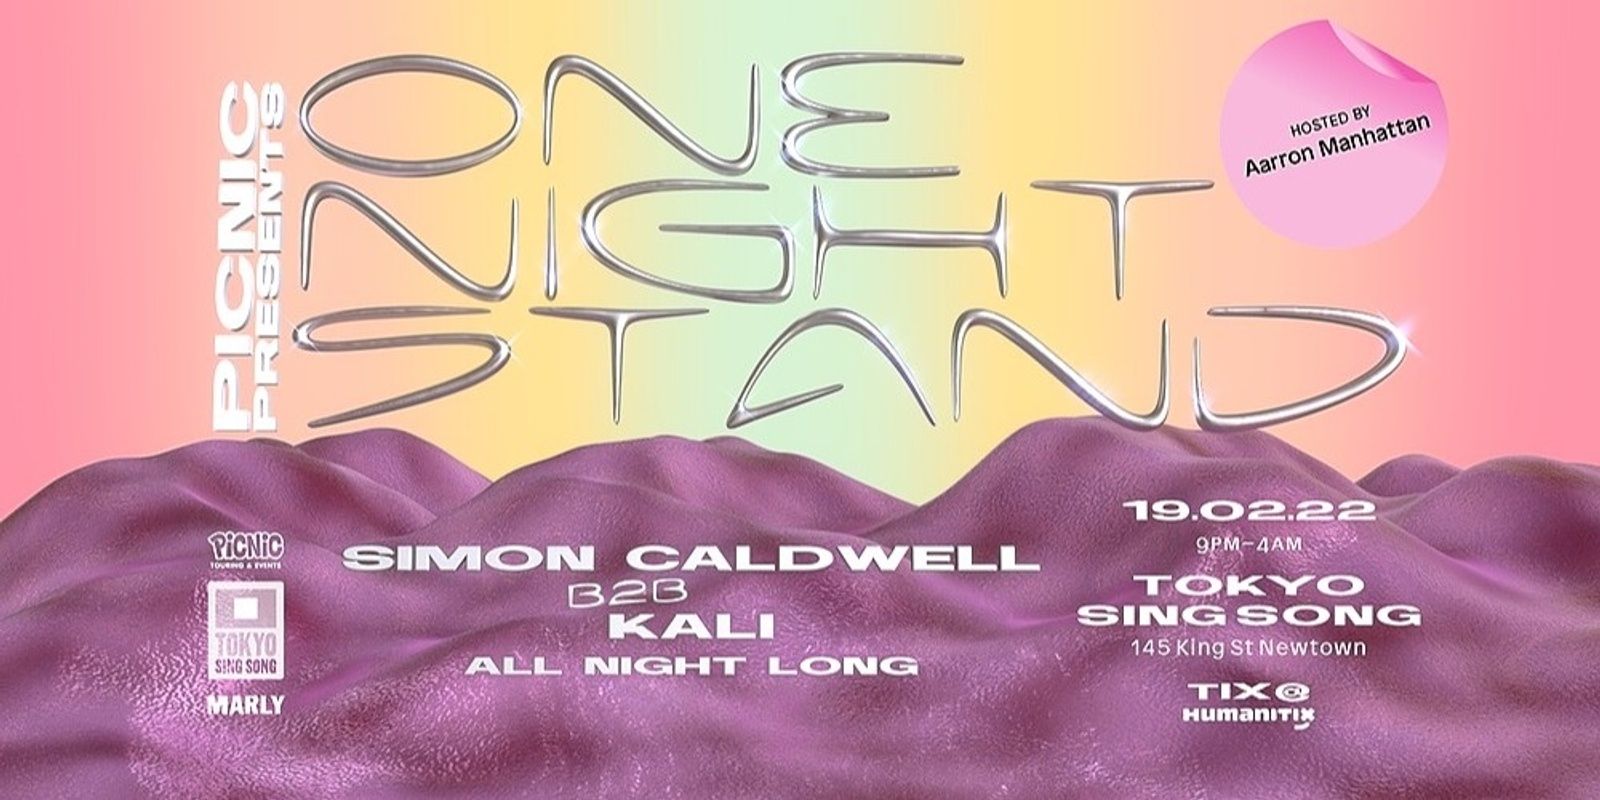 Banner image for Picnic One Night Stand Simon Caldwell + Kali | Hosted by Aarron Manhattan 